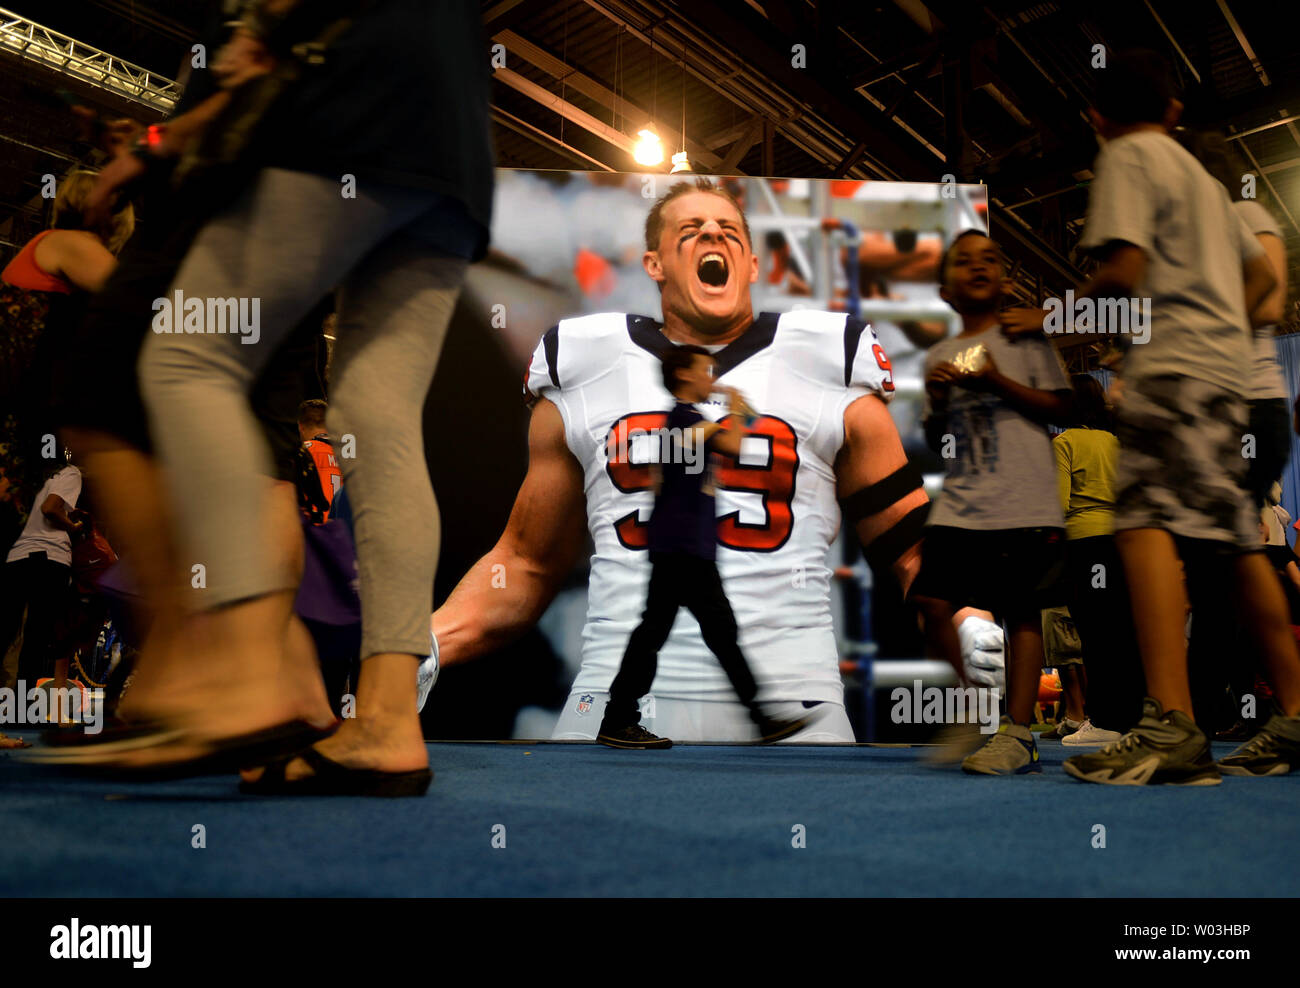 Fans pass a display of Houston Texans' J.J Watt at the NFL Experience in the run up to Super Bowl XLIX in Phoenix, Arizona on January 28, 2015. The New Engalnd Patriots will take on the Seattle Seahawks in Super Bowl XLIX on Sunday, February 1. Photo by Kevin Dietsch/UPI Stock Photo